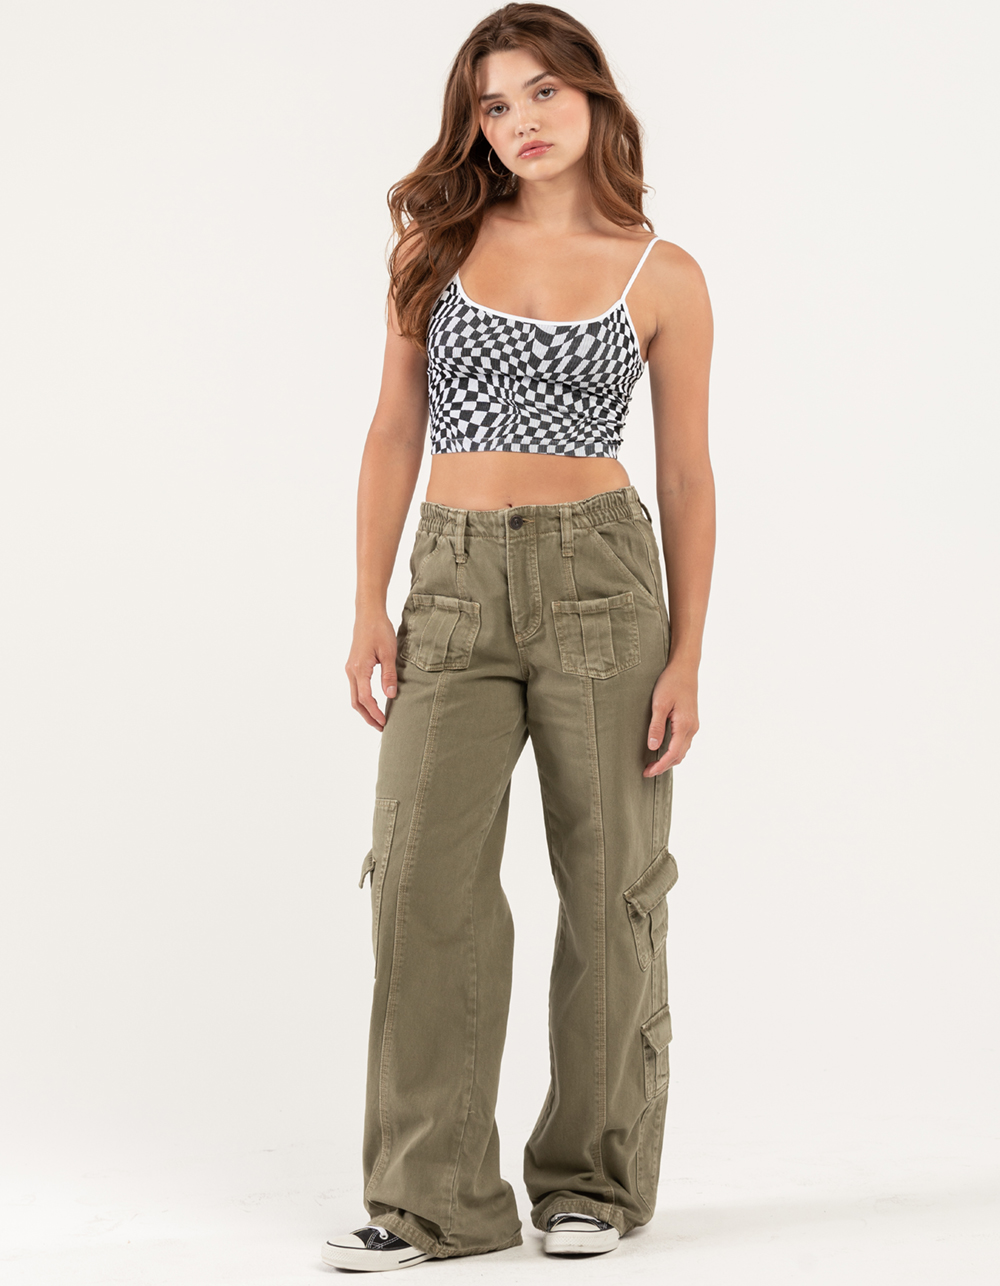 Helms Cargo Short Urban Outfitters Women Clothing Pants Cargo Pants 